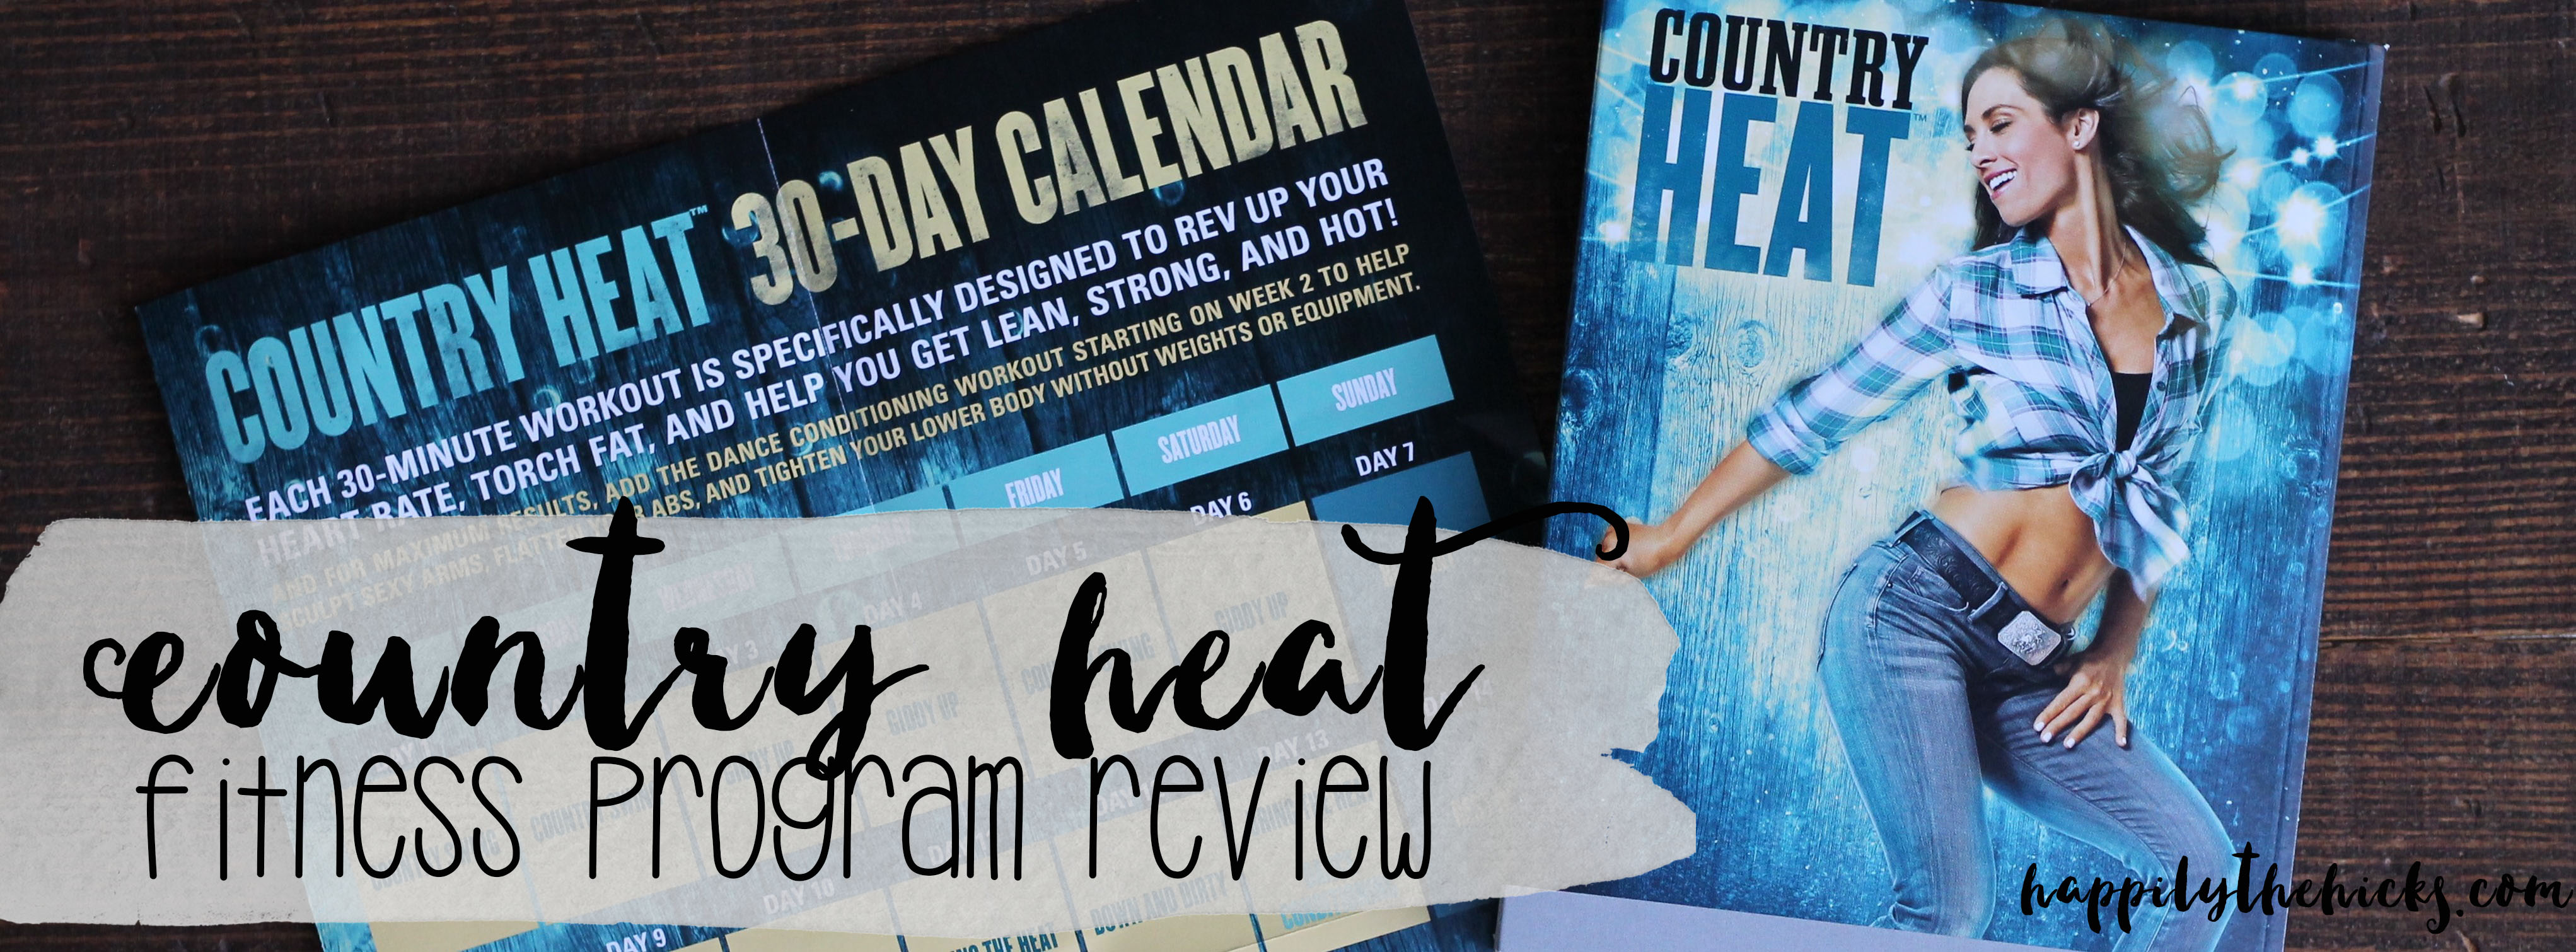 Country Heat by BeachBody Review | read more at happilythehicks.com